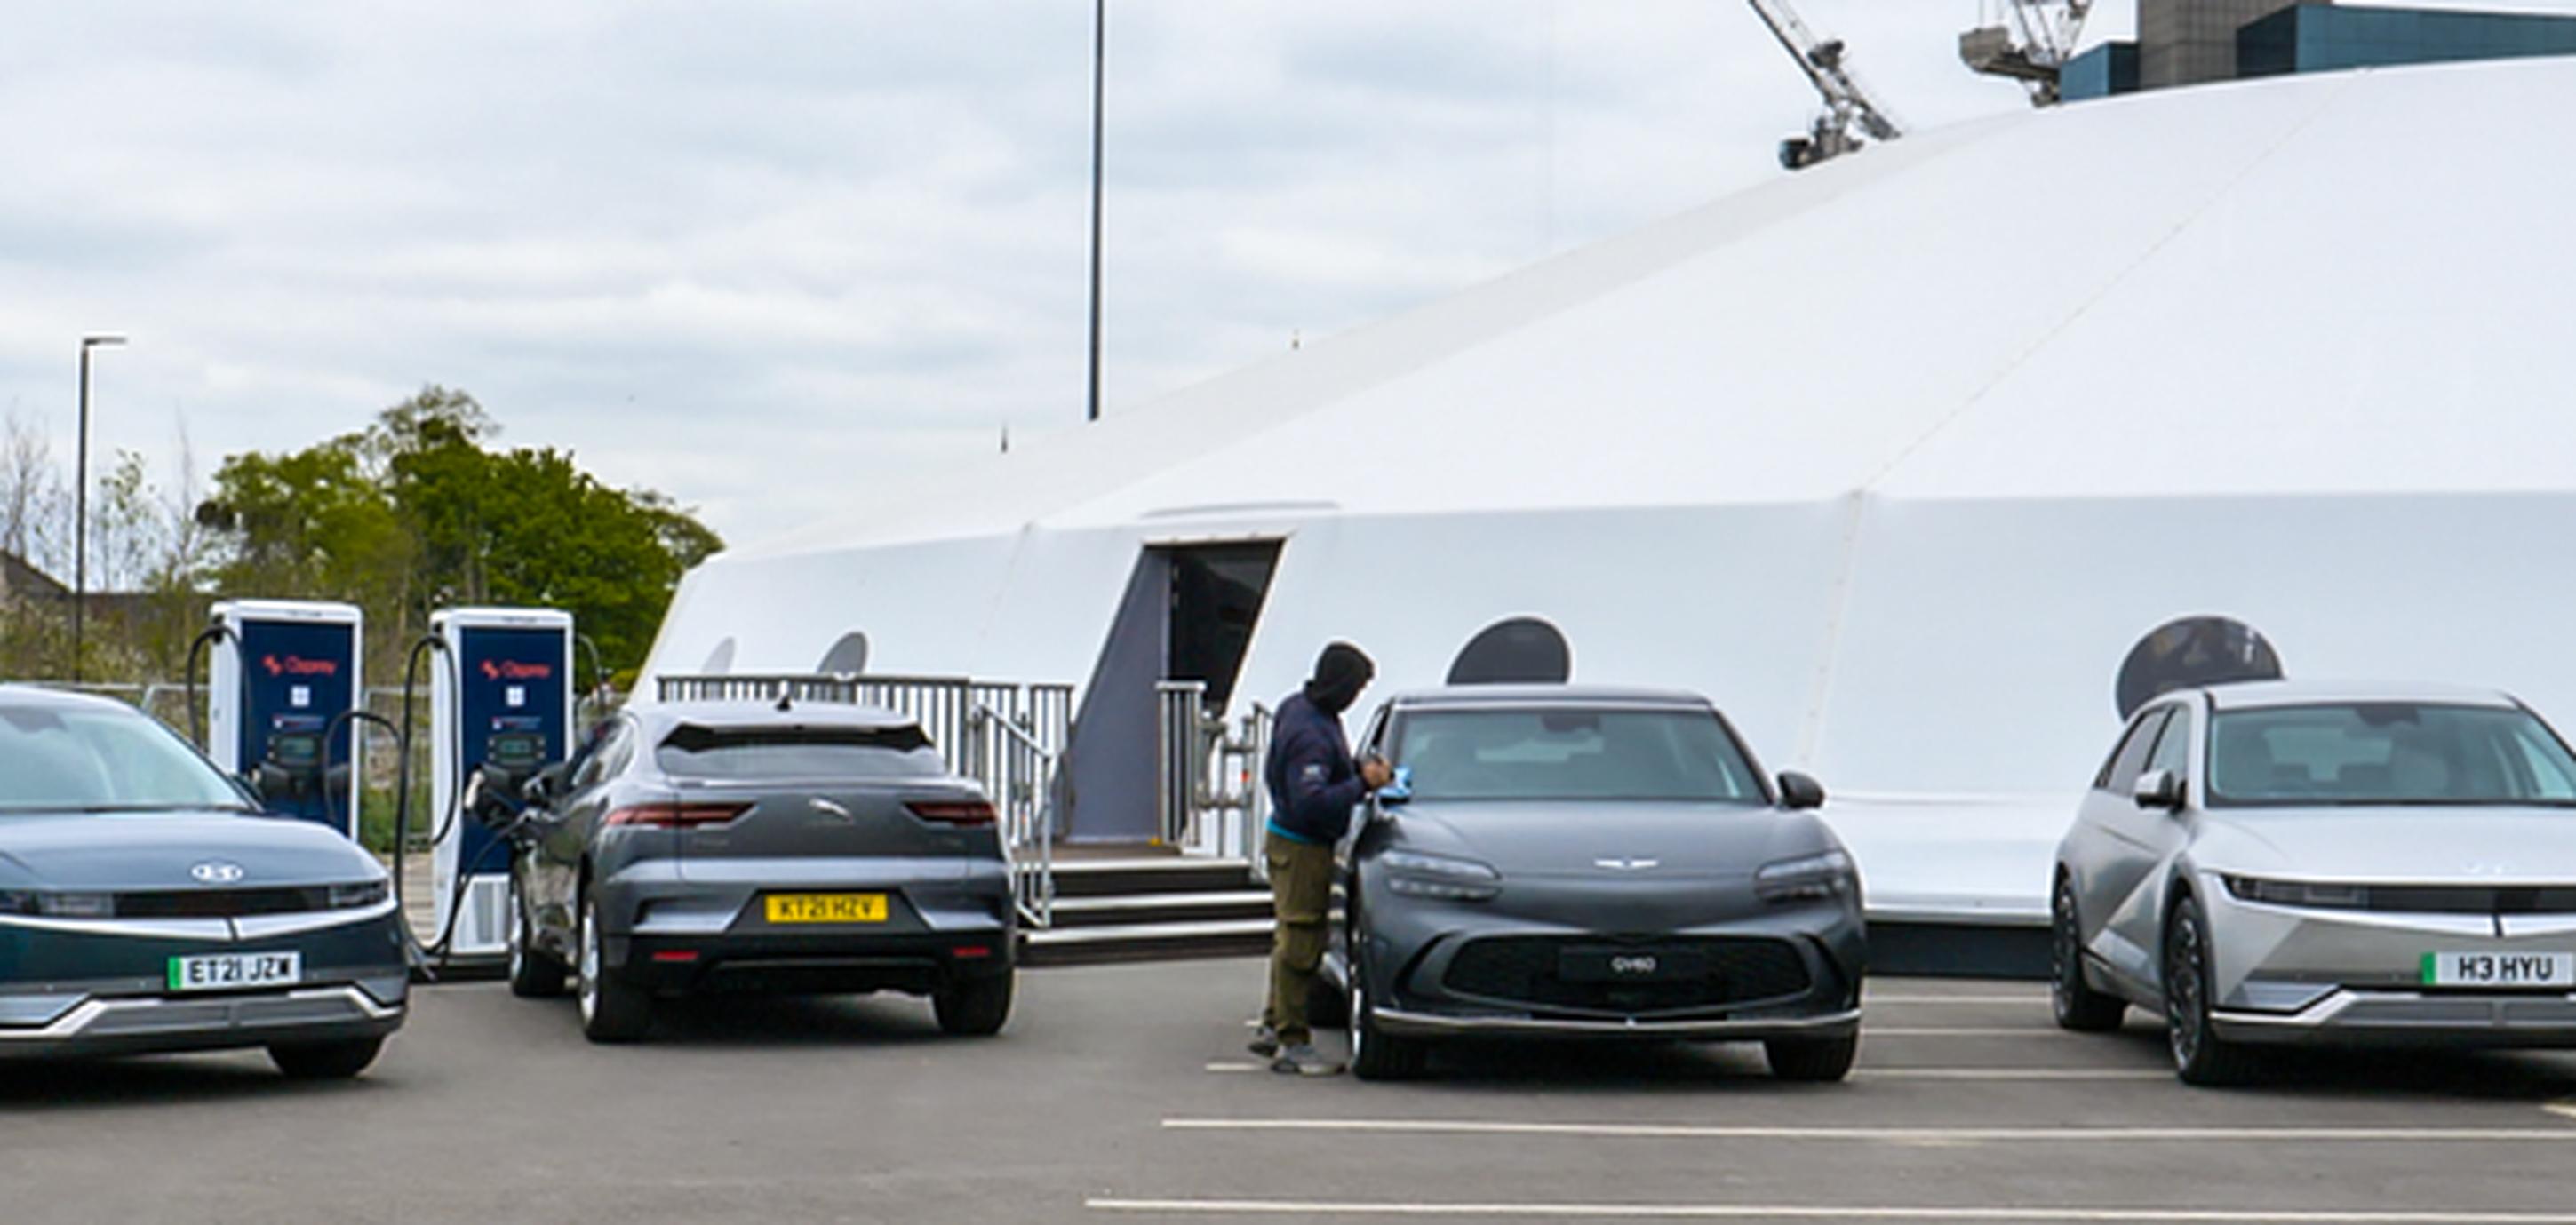 Urban-Air Port’s Air One event in Coventry has showcased Osprey’s charging points for electric vehicles